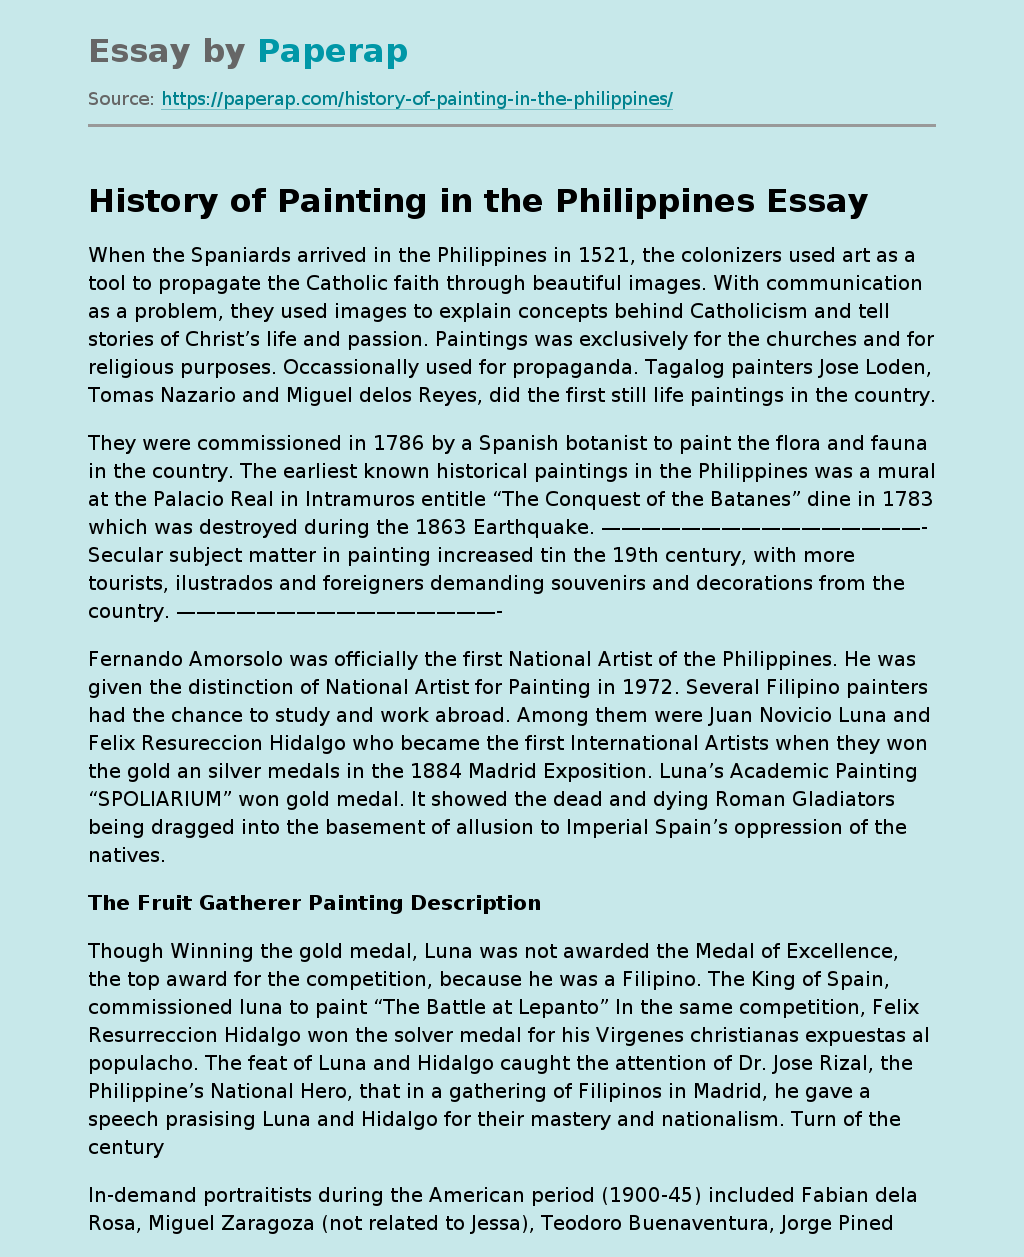 History of Painting in the Philippines